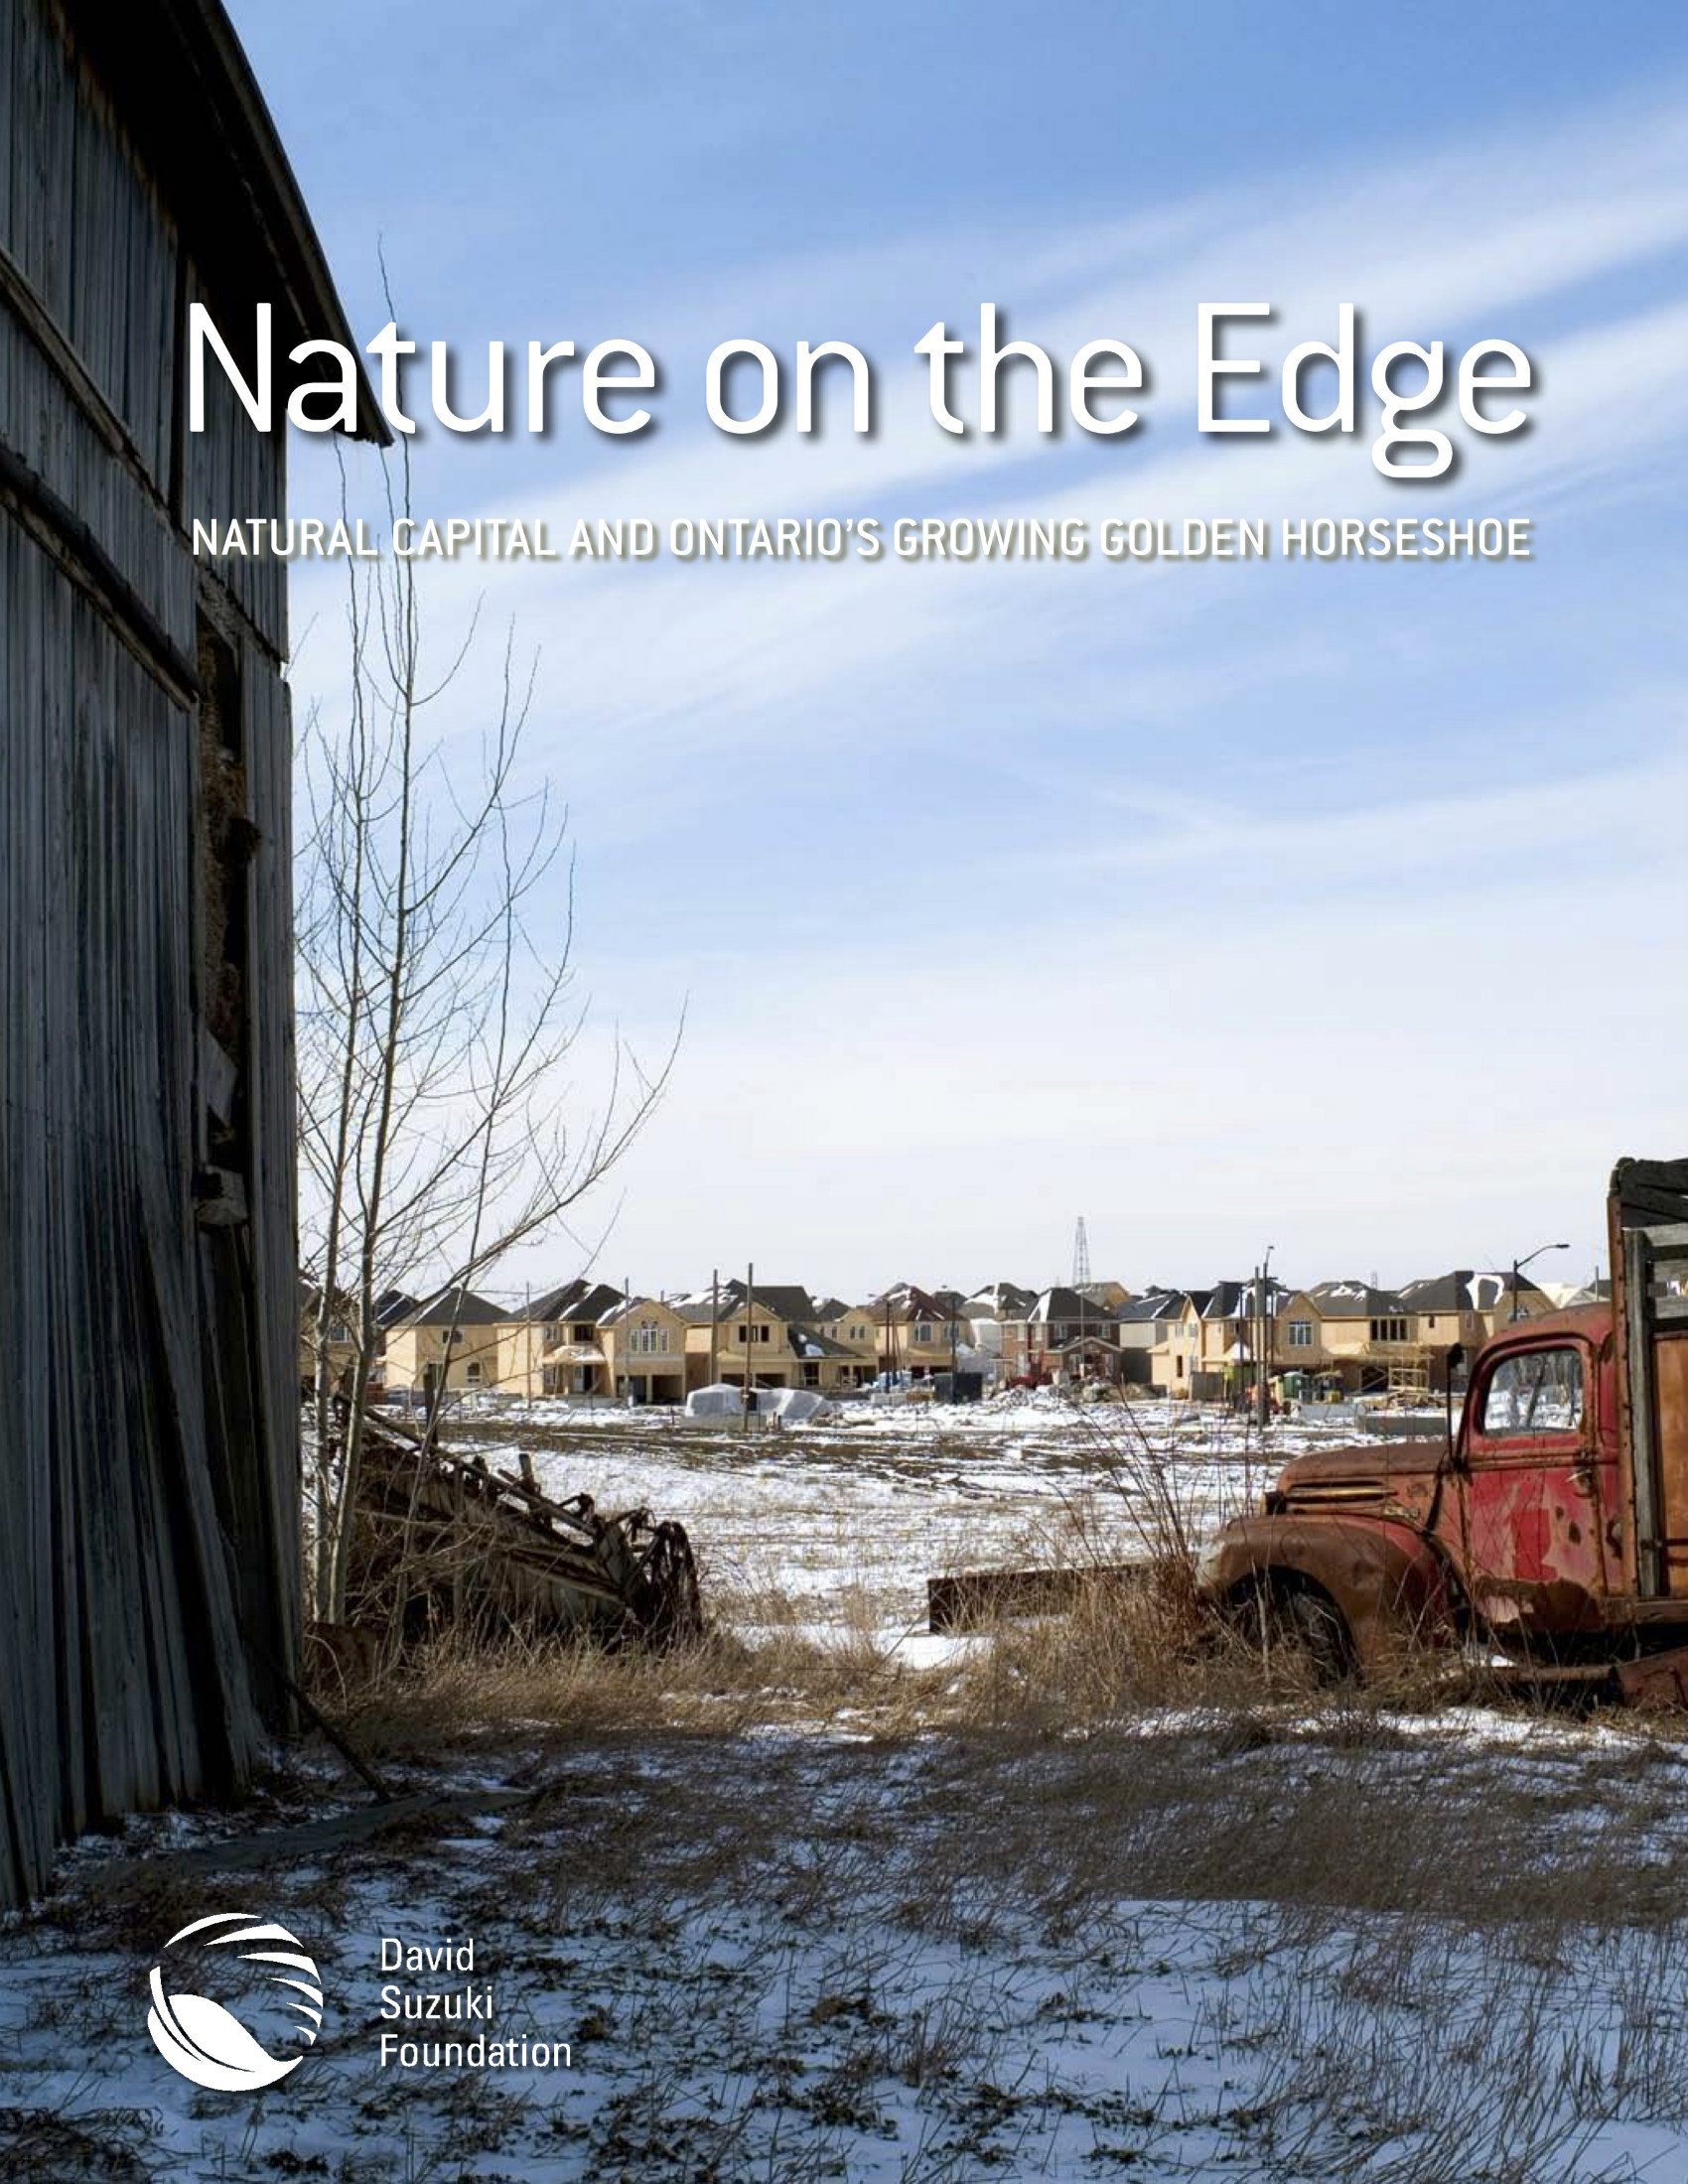 Nature on the Edge: Natural Capital and Ontario's Growing Golden Horseshoe